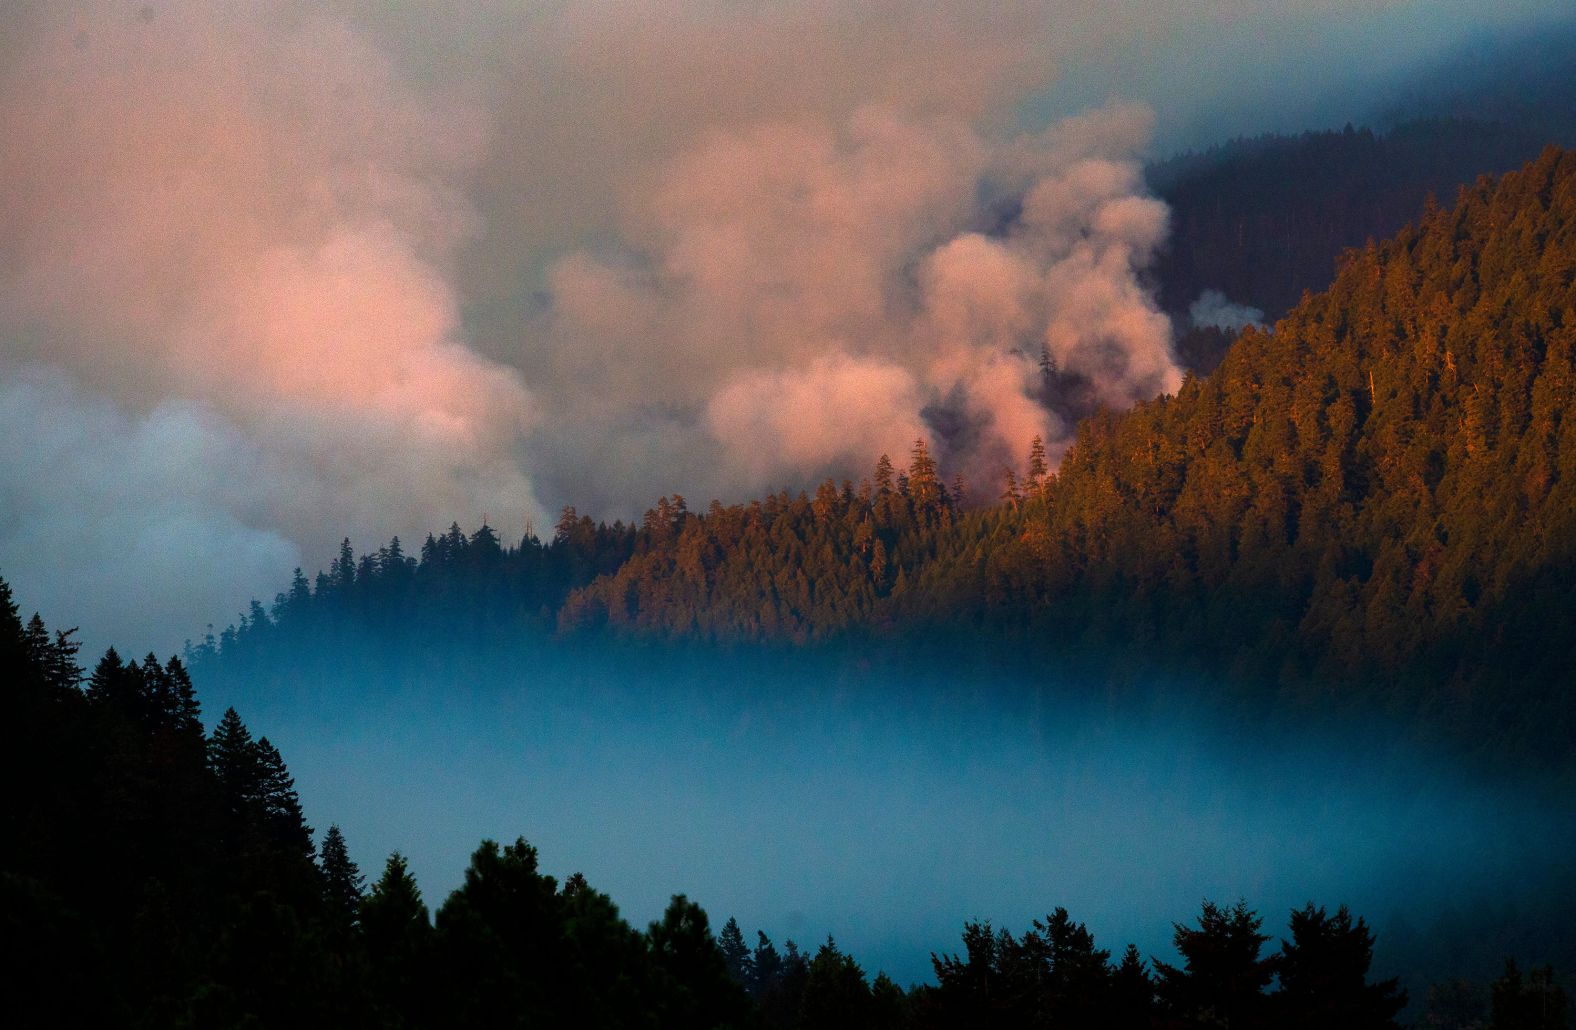 Smoke plumes rise from the Kwis Fire near Eugene, Oregon, on August 10.